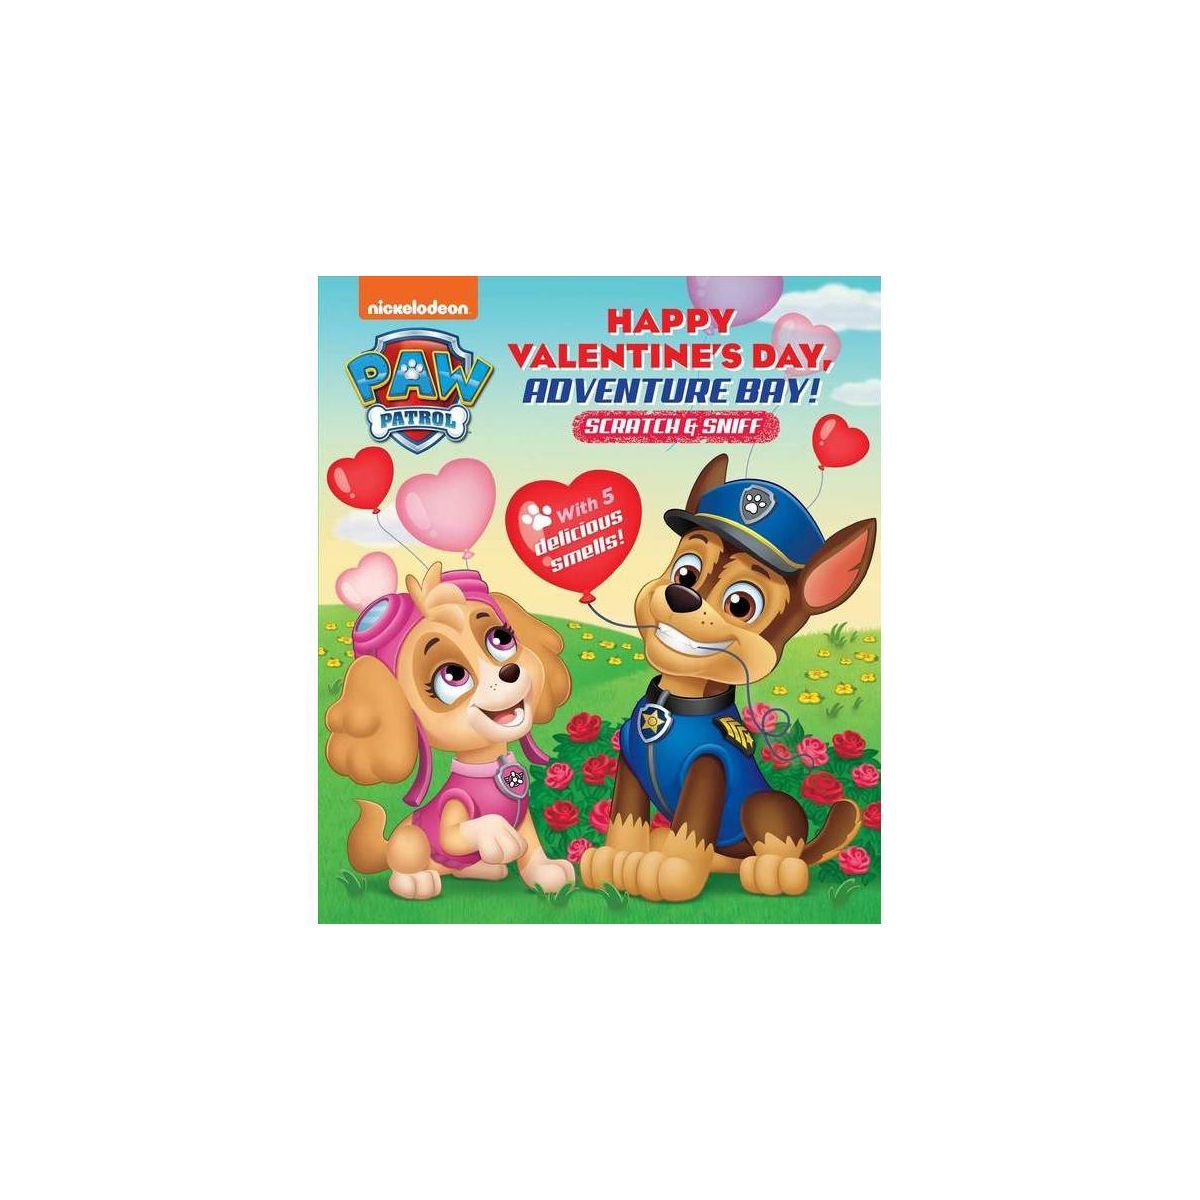 Nickelodeon Paw Patrol: Happy Valentine's Day, Adventure Bay! - (Scratch and Sniff) (Board Book) | Target